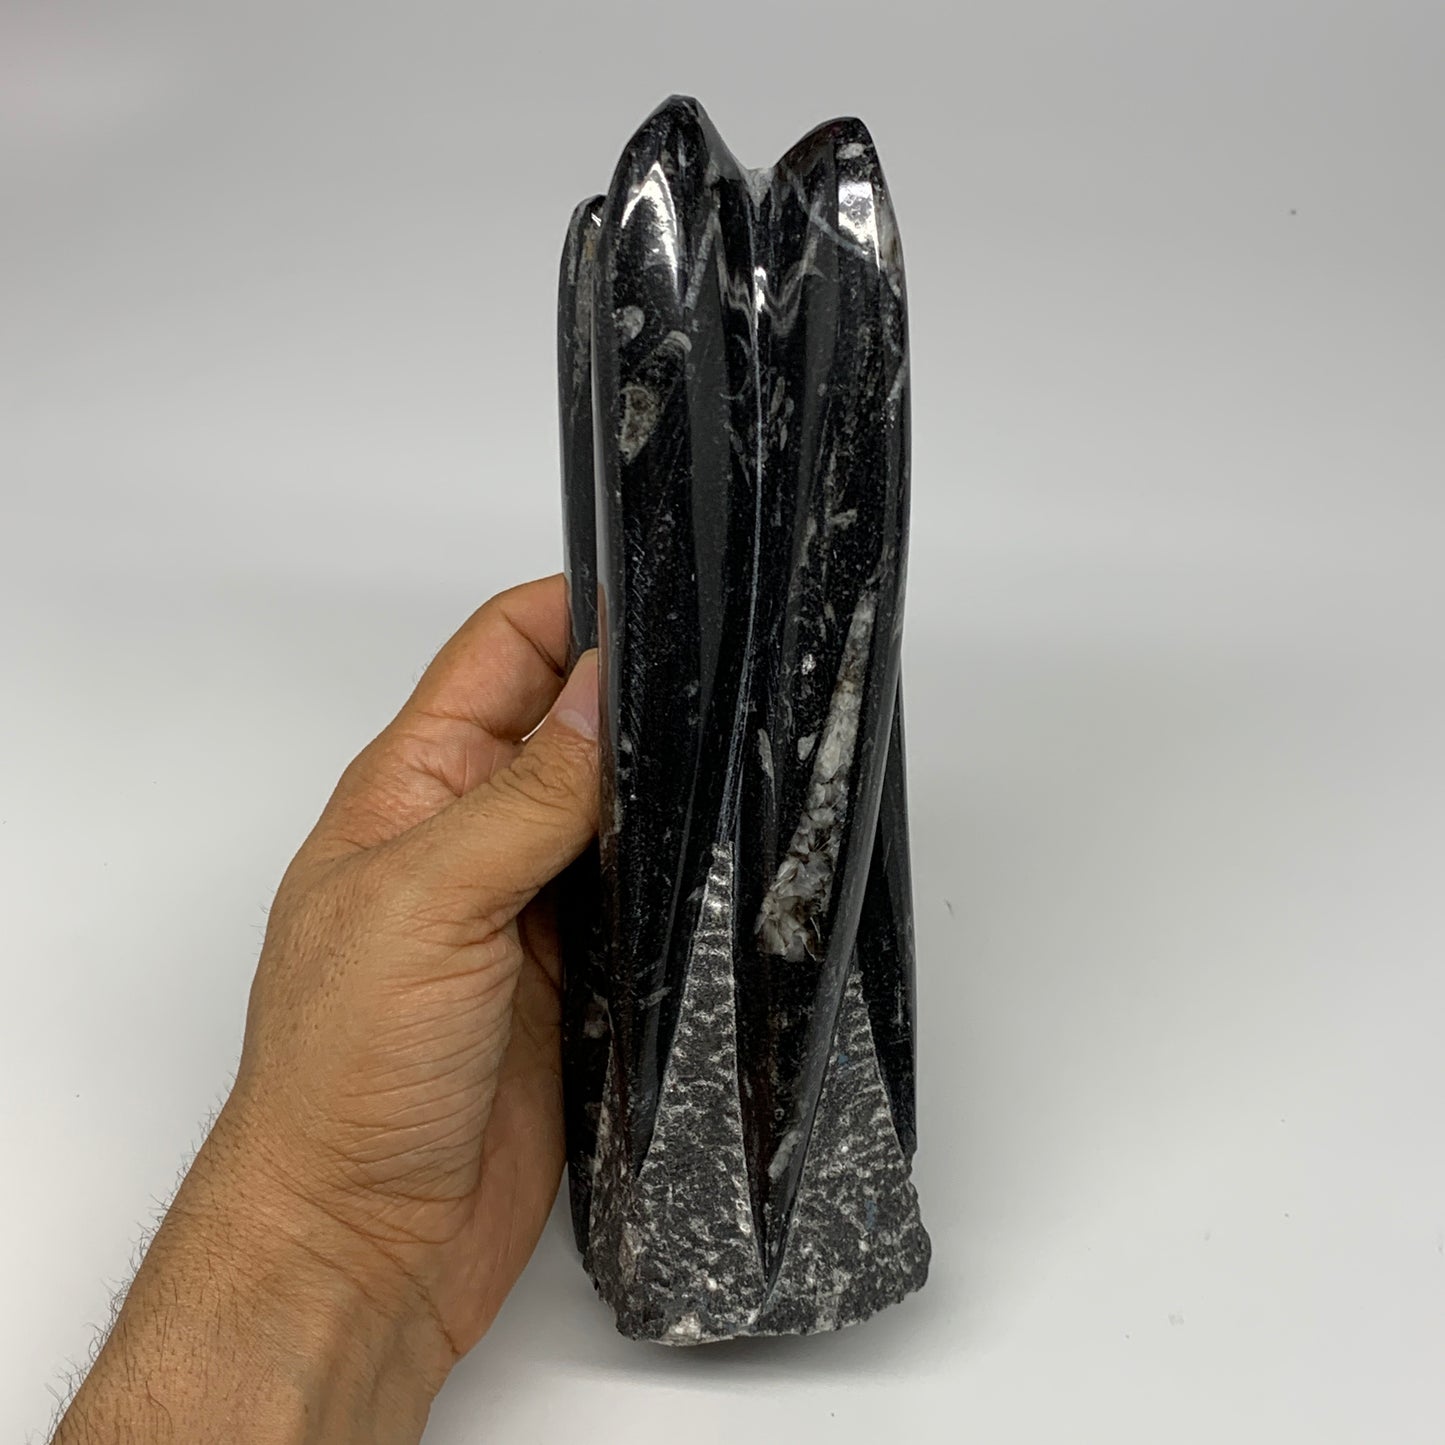 1100g, 8"x2.5"2.6" Black Fossils Orthoceras Sculpture Tower @Morocco, B23408